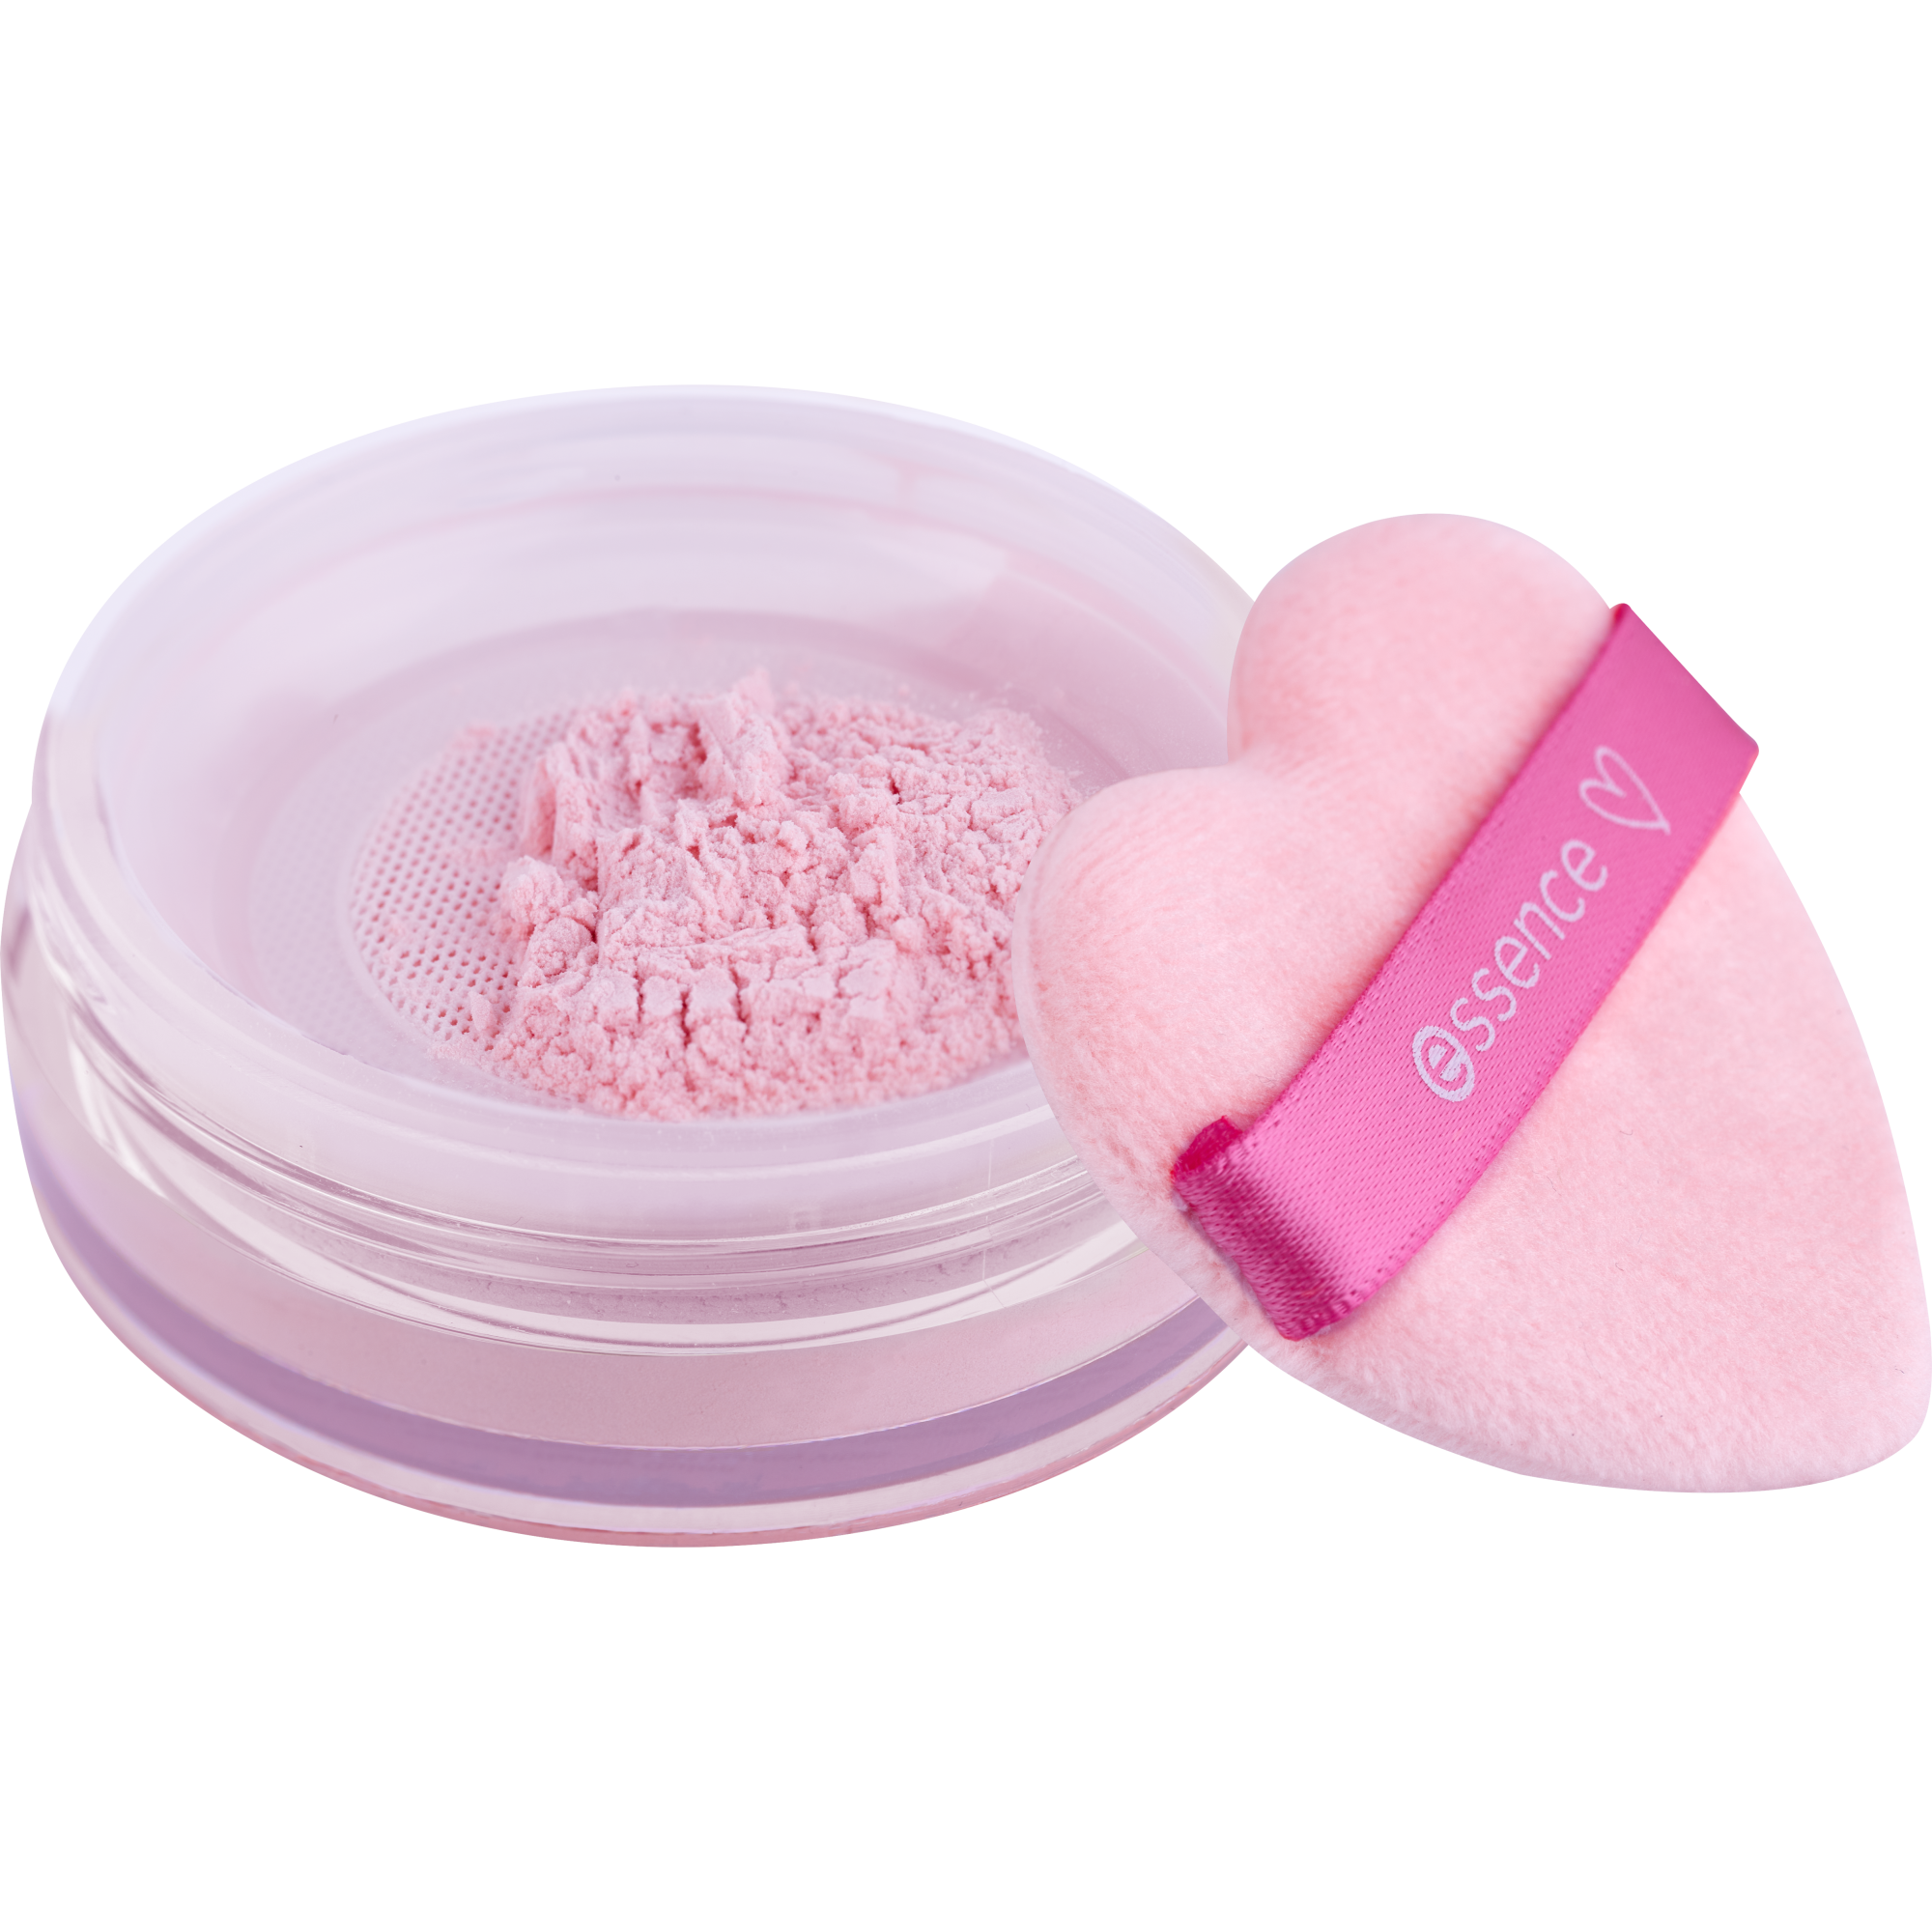 Harley Quinn pink loose setting powder poudre fixatrice